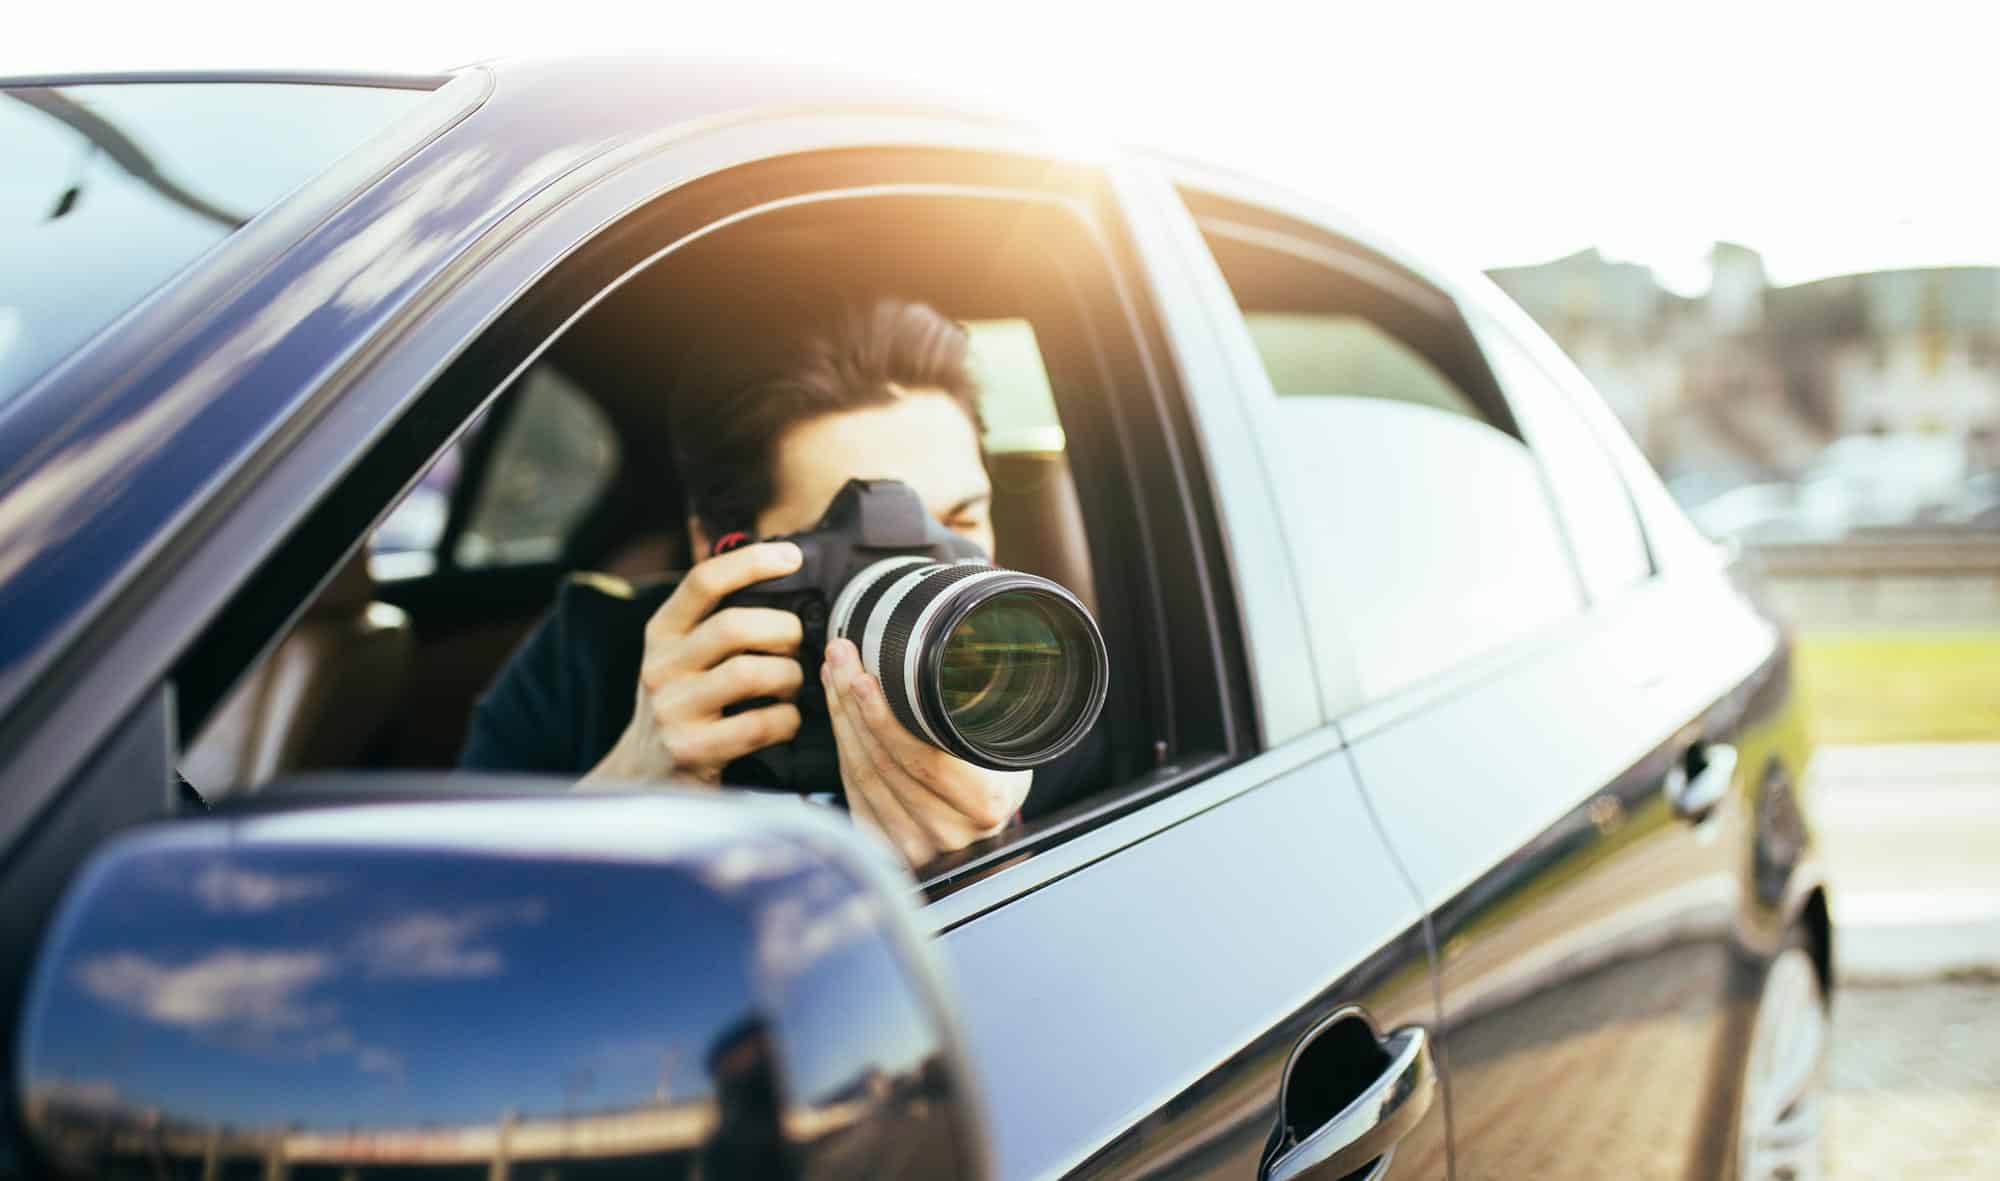 How to Deal With a Private Investigator After a Car Accident